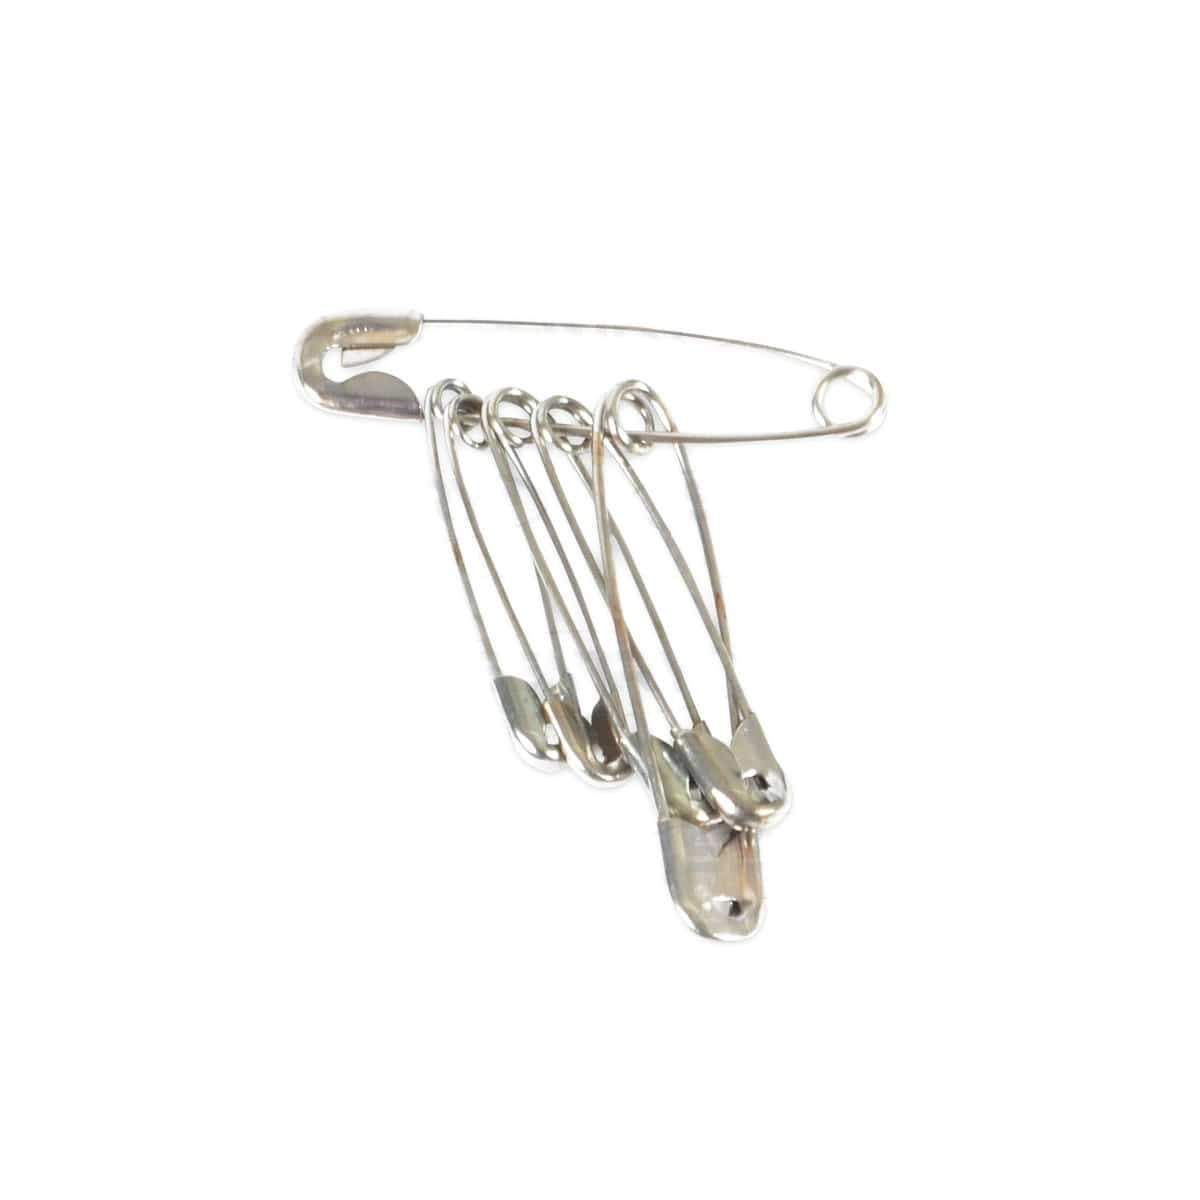 Sentry Safety Pins Assorted Sizes